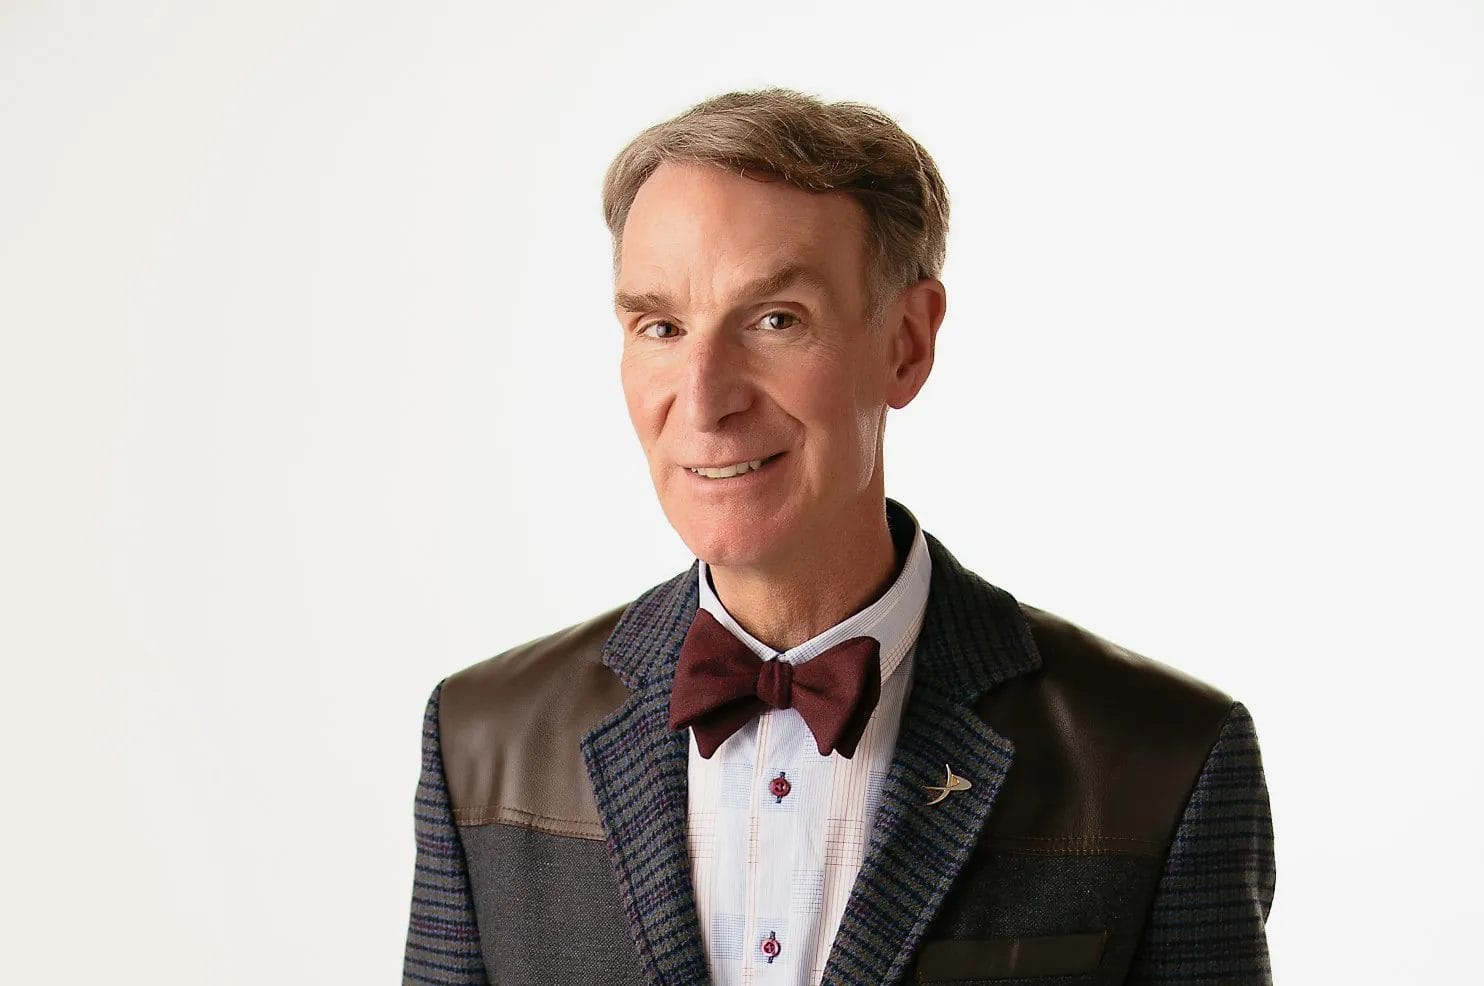 Did Bill Nye The Science Guy Go To Jail